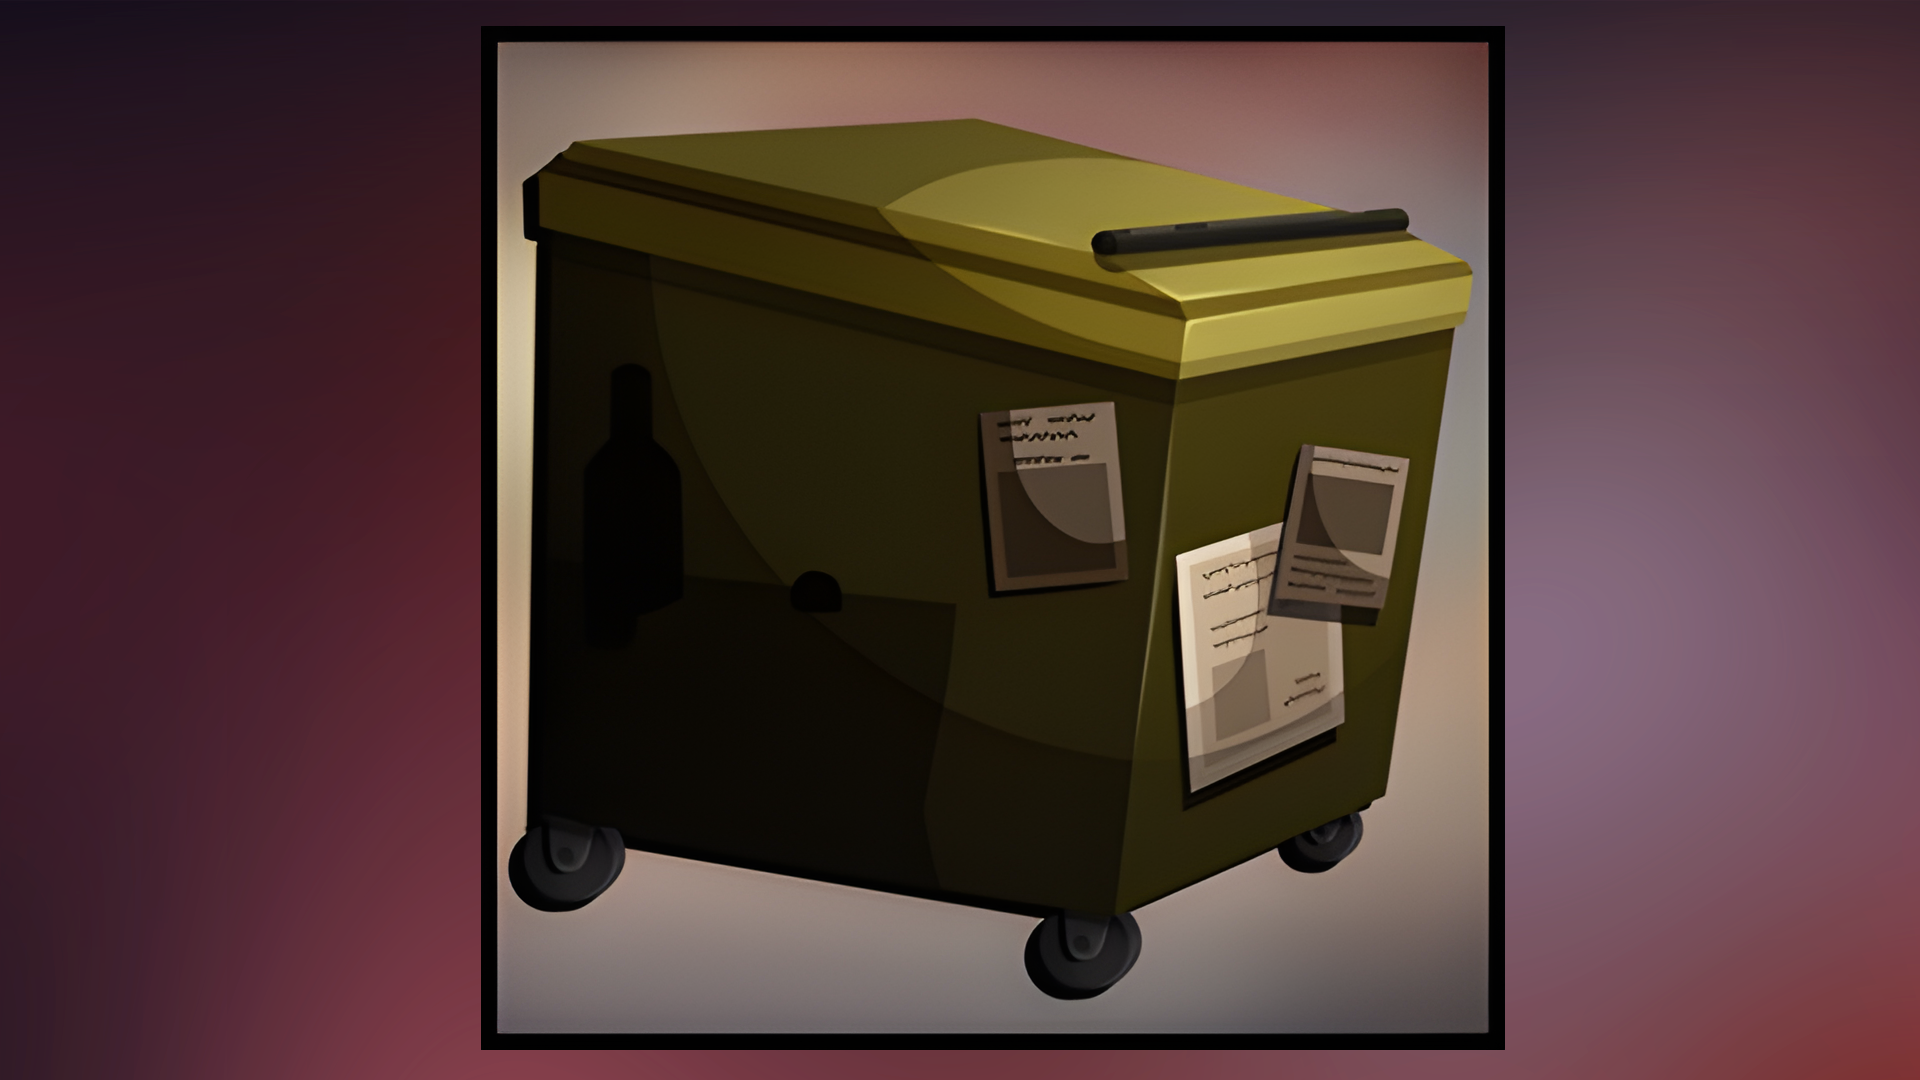 Icon for Dumpster Diving